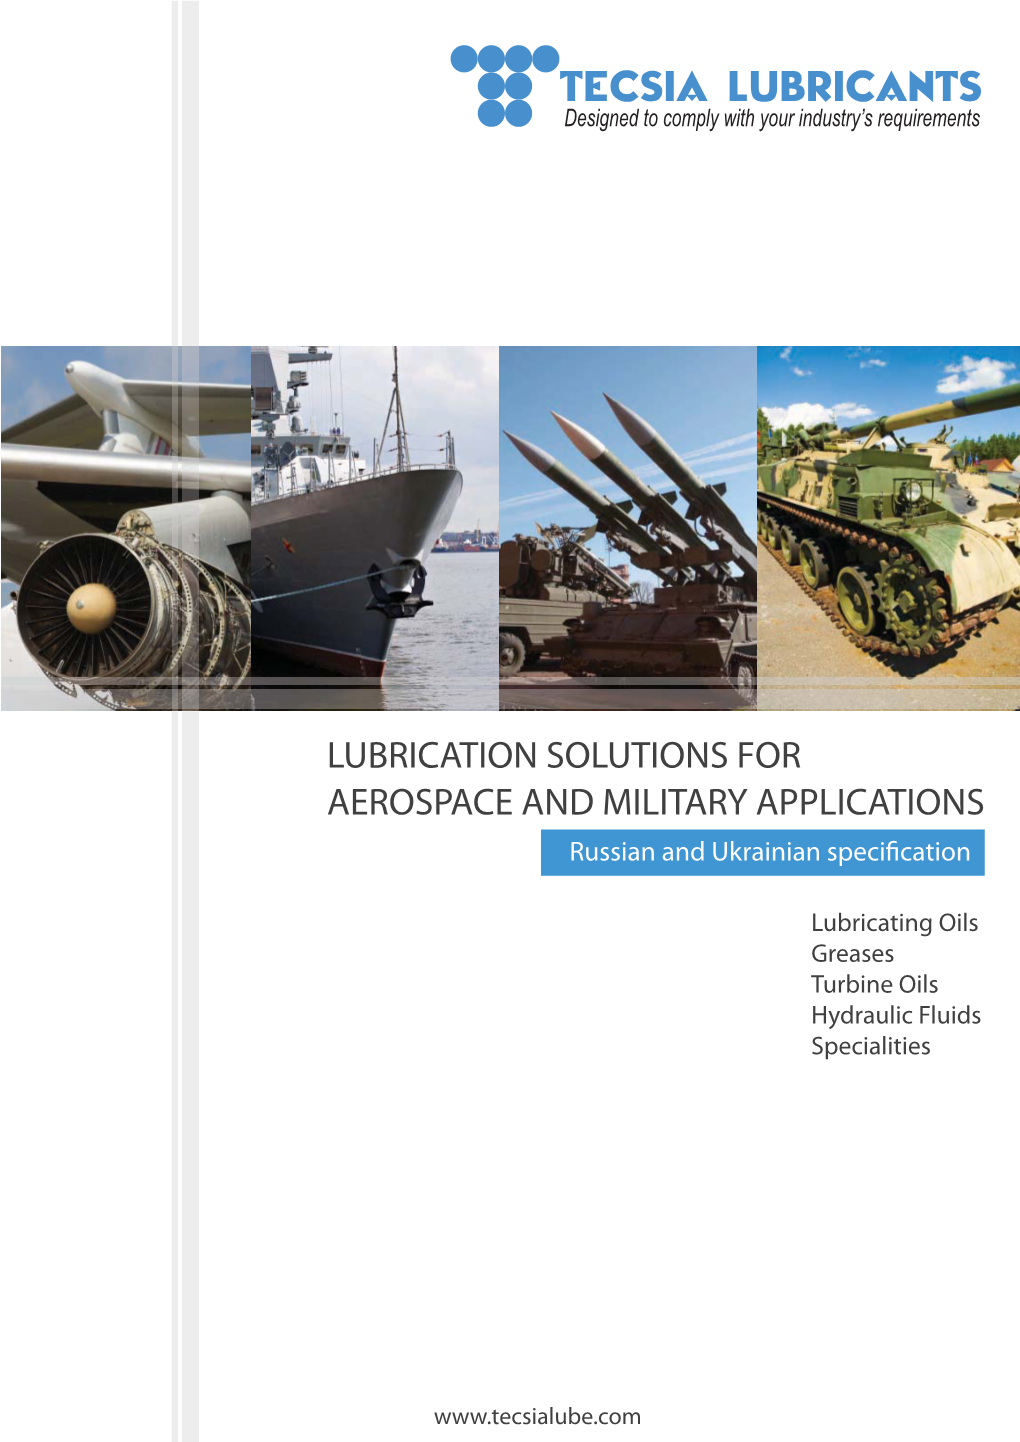 LUBRICATION SOLUTIONS for AEROSPACE and MILITARY APPLICATIONS Russian and Ukrainian Specification